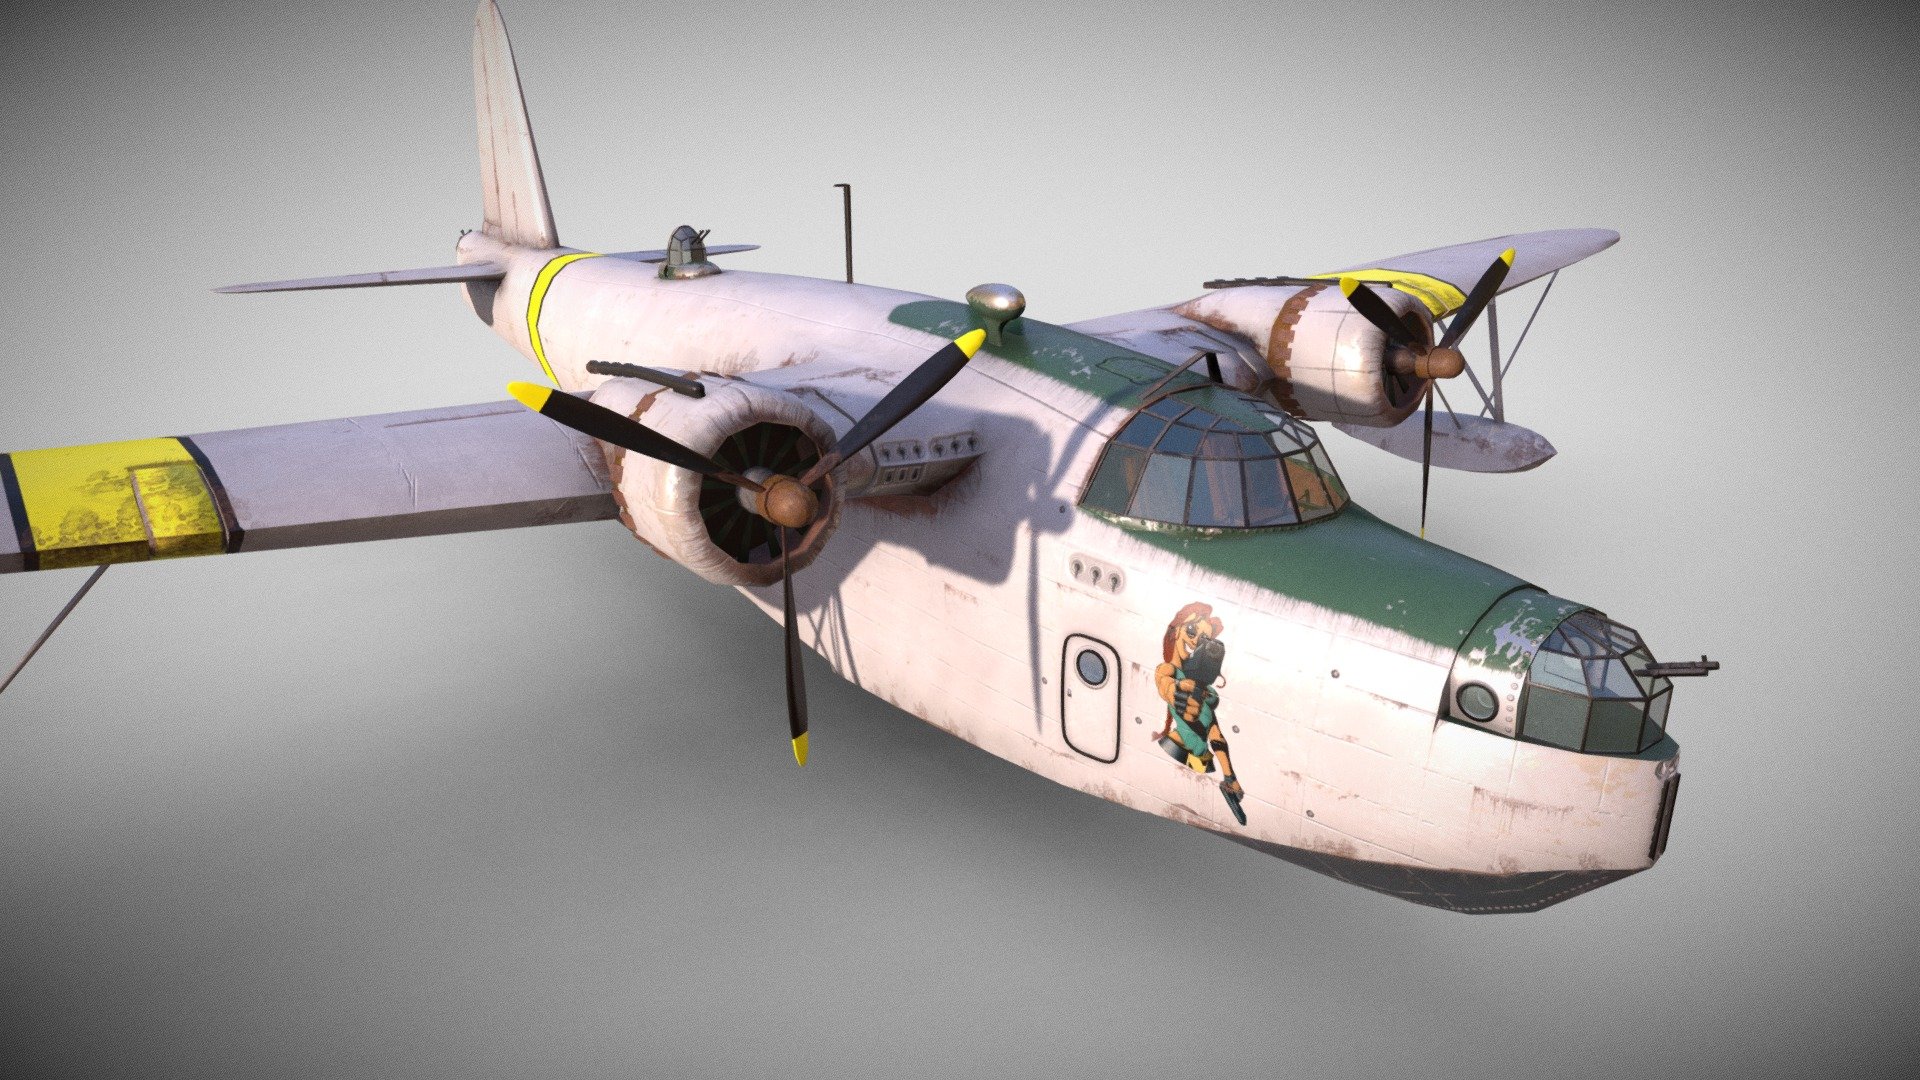 This airplane was presented in original TR 2 game in several cutscenes.
Here is my lowpoly reconstruction of it 3d model